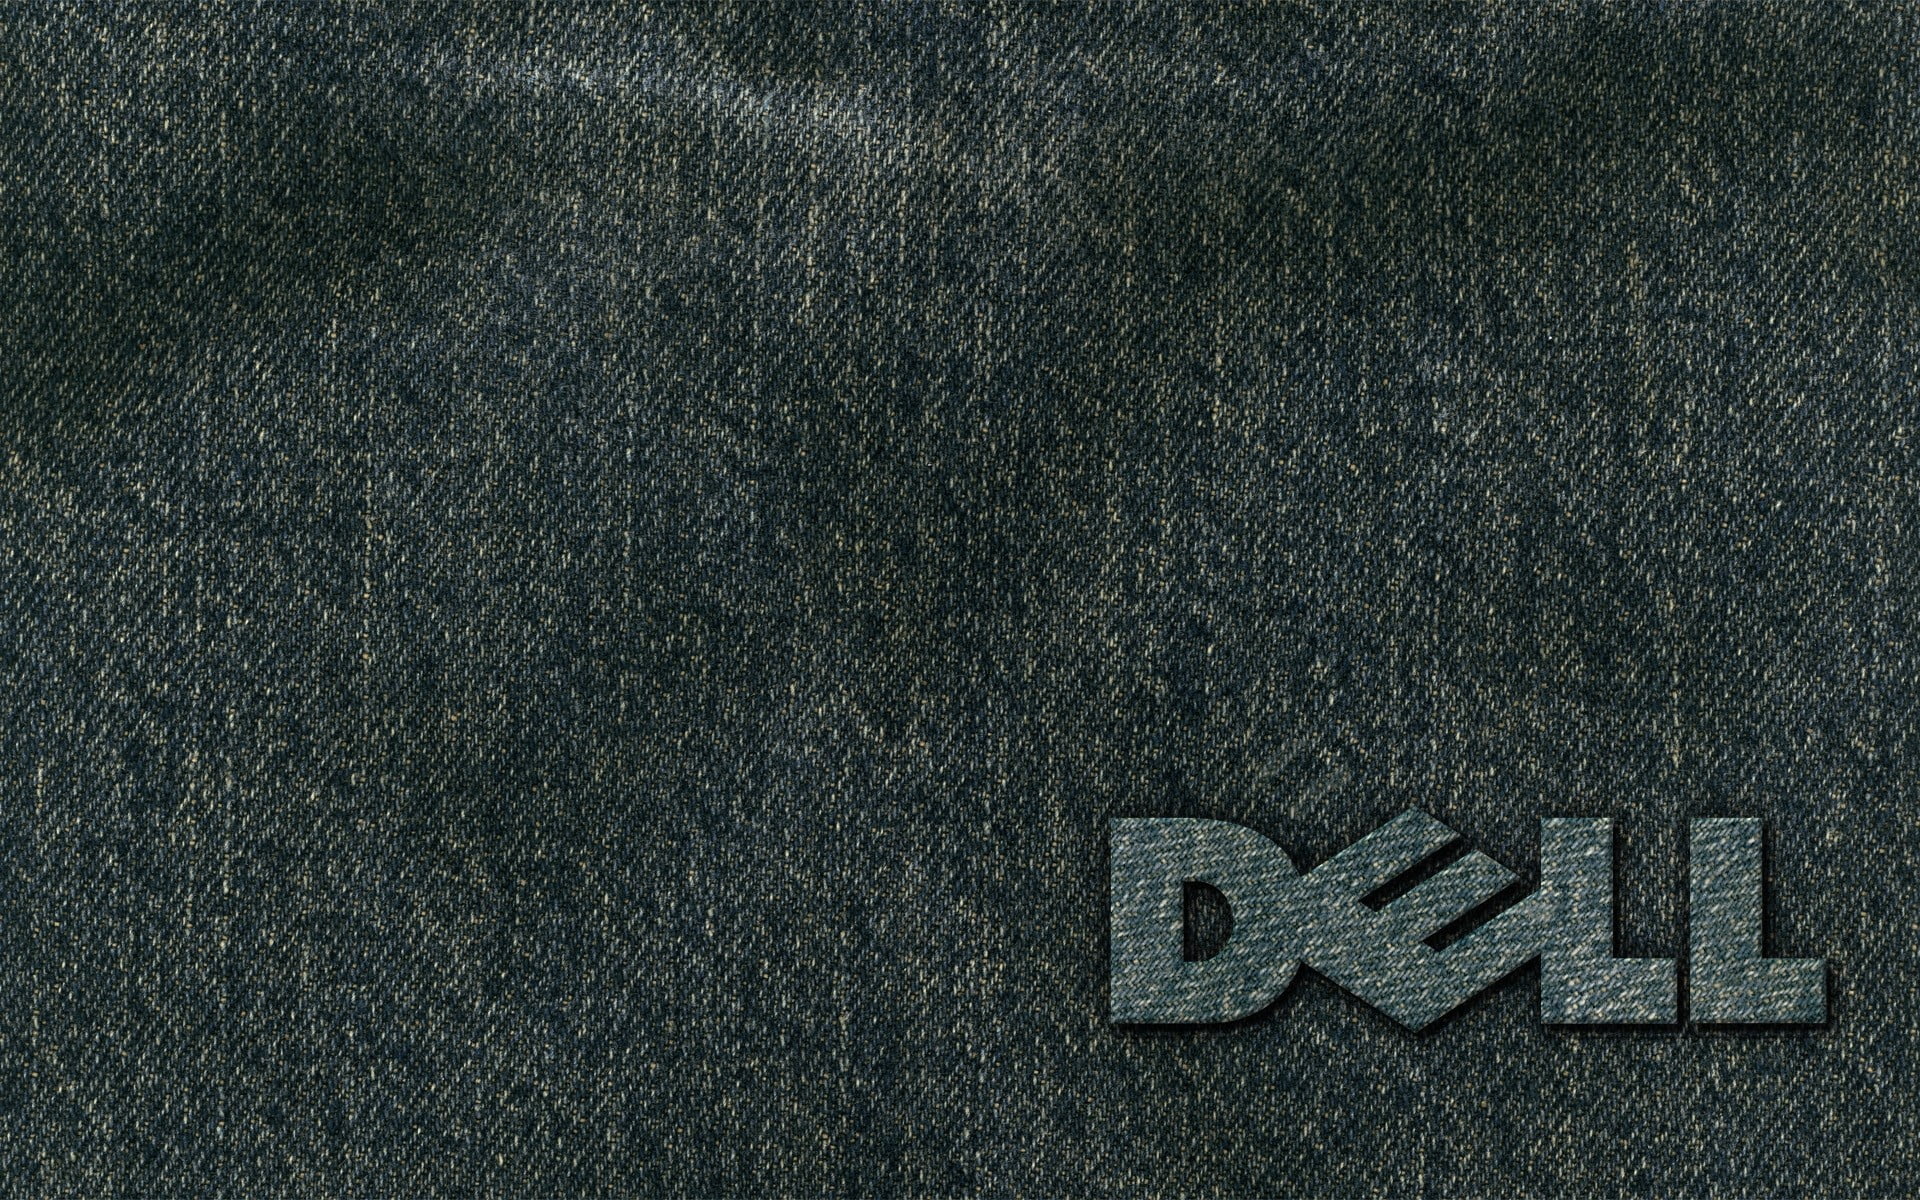 Dell, Computers, Company, Brand, Jeans, textile, casual clothing